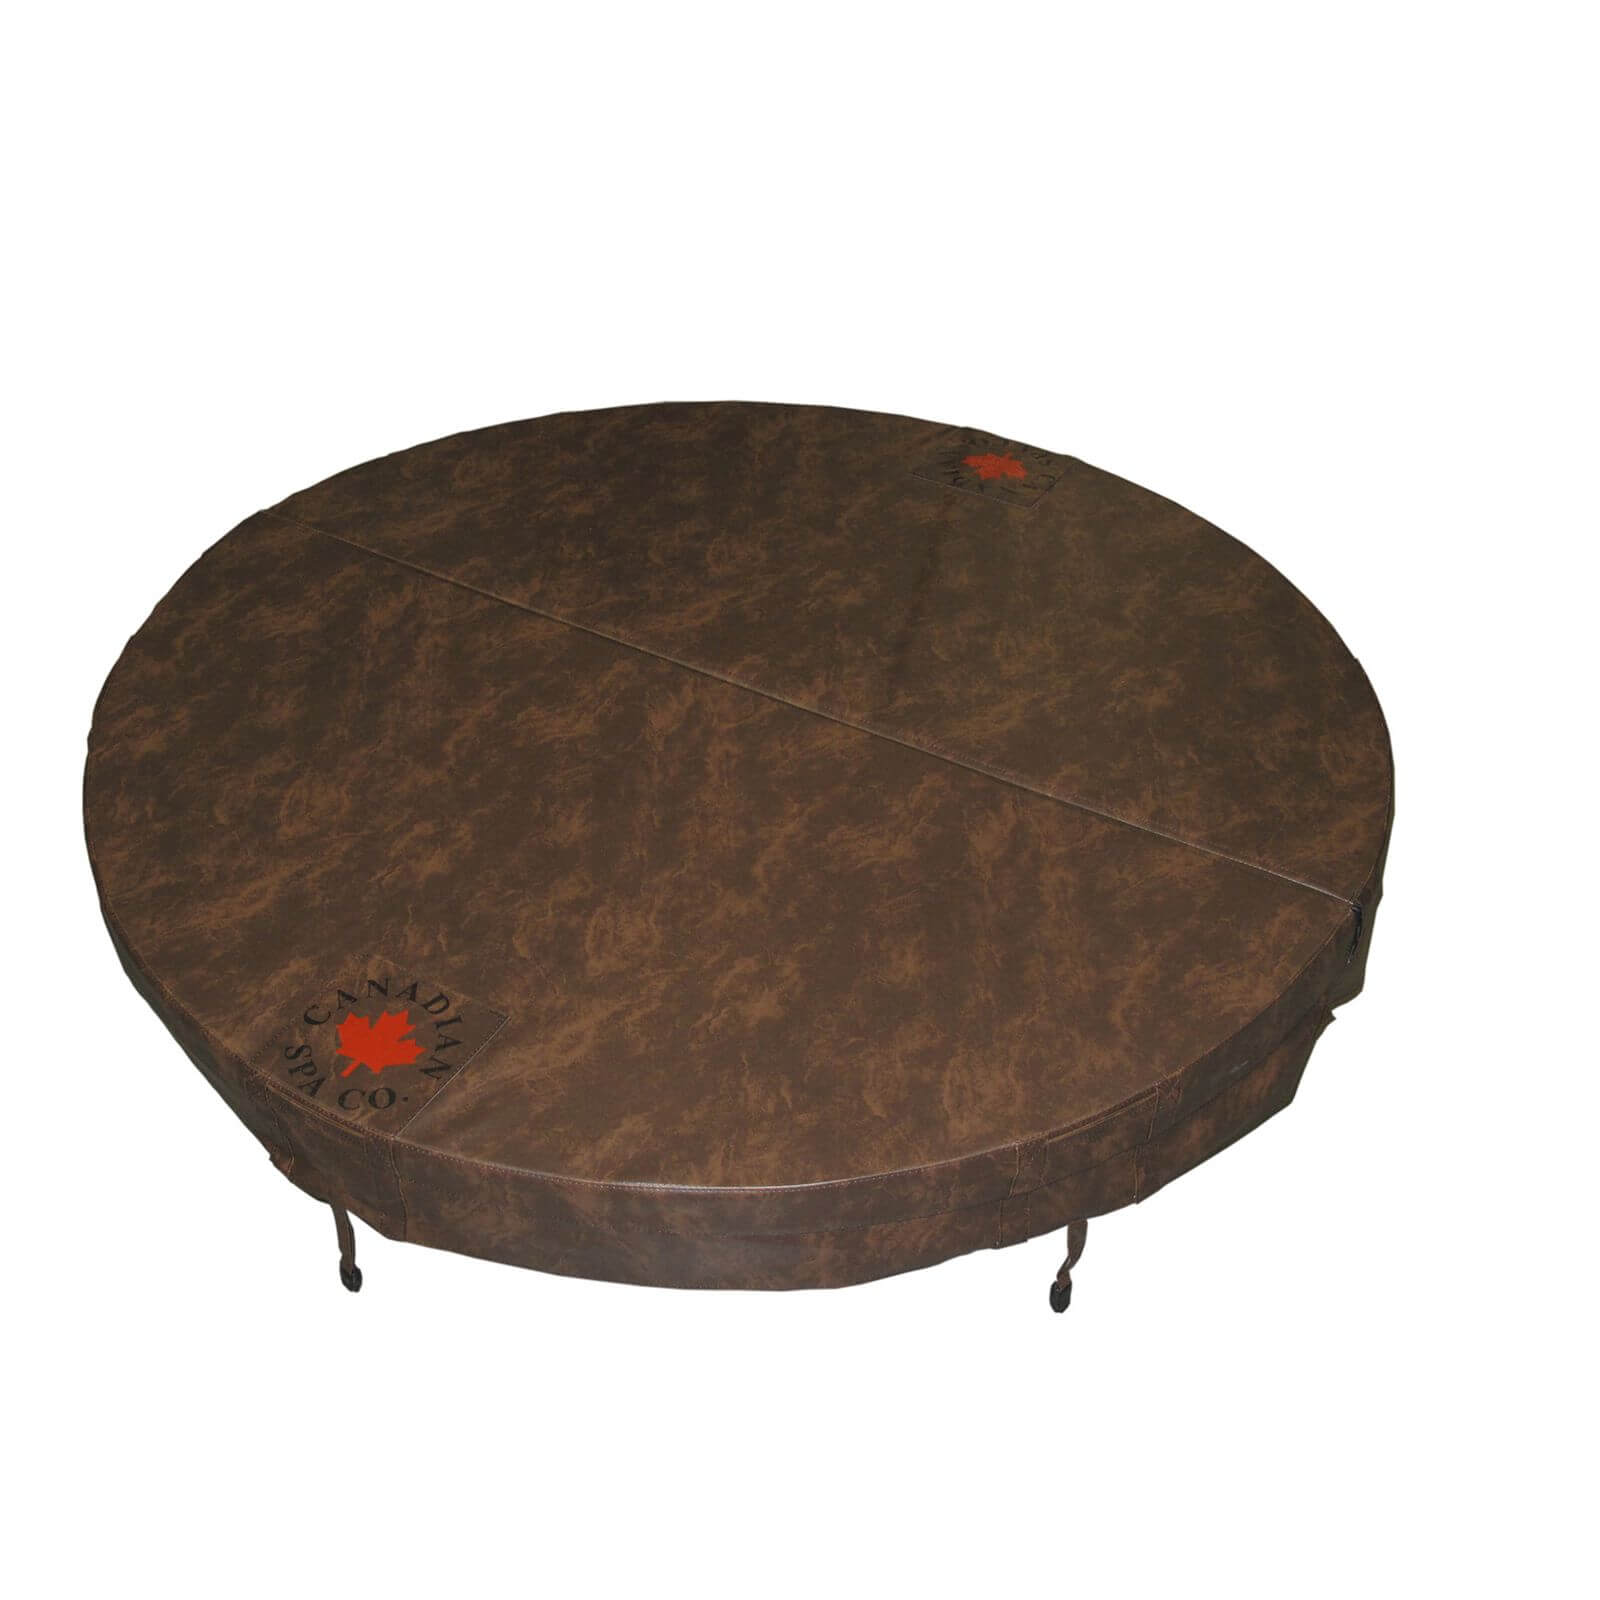 Photo of Canadian Spa Round Hot Tub Cover - Brown / 198cm Diameter